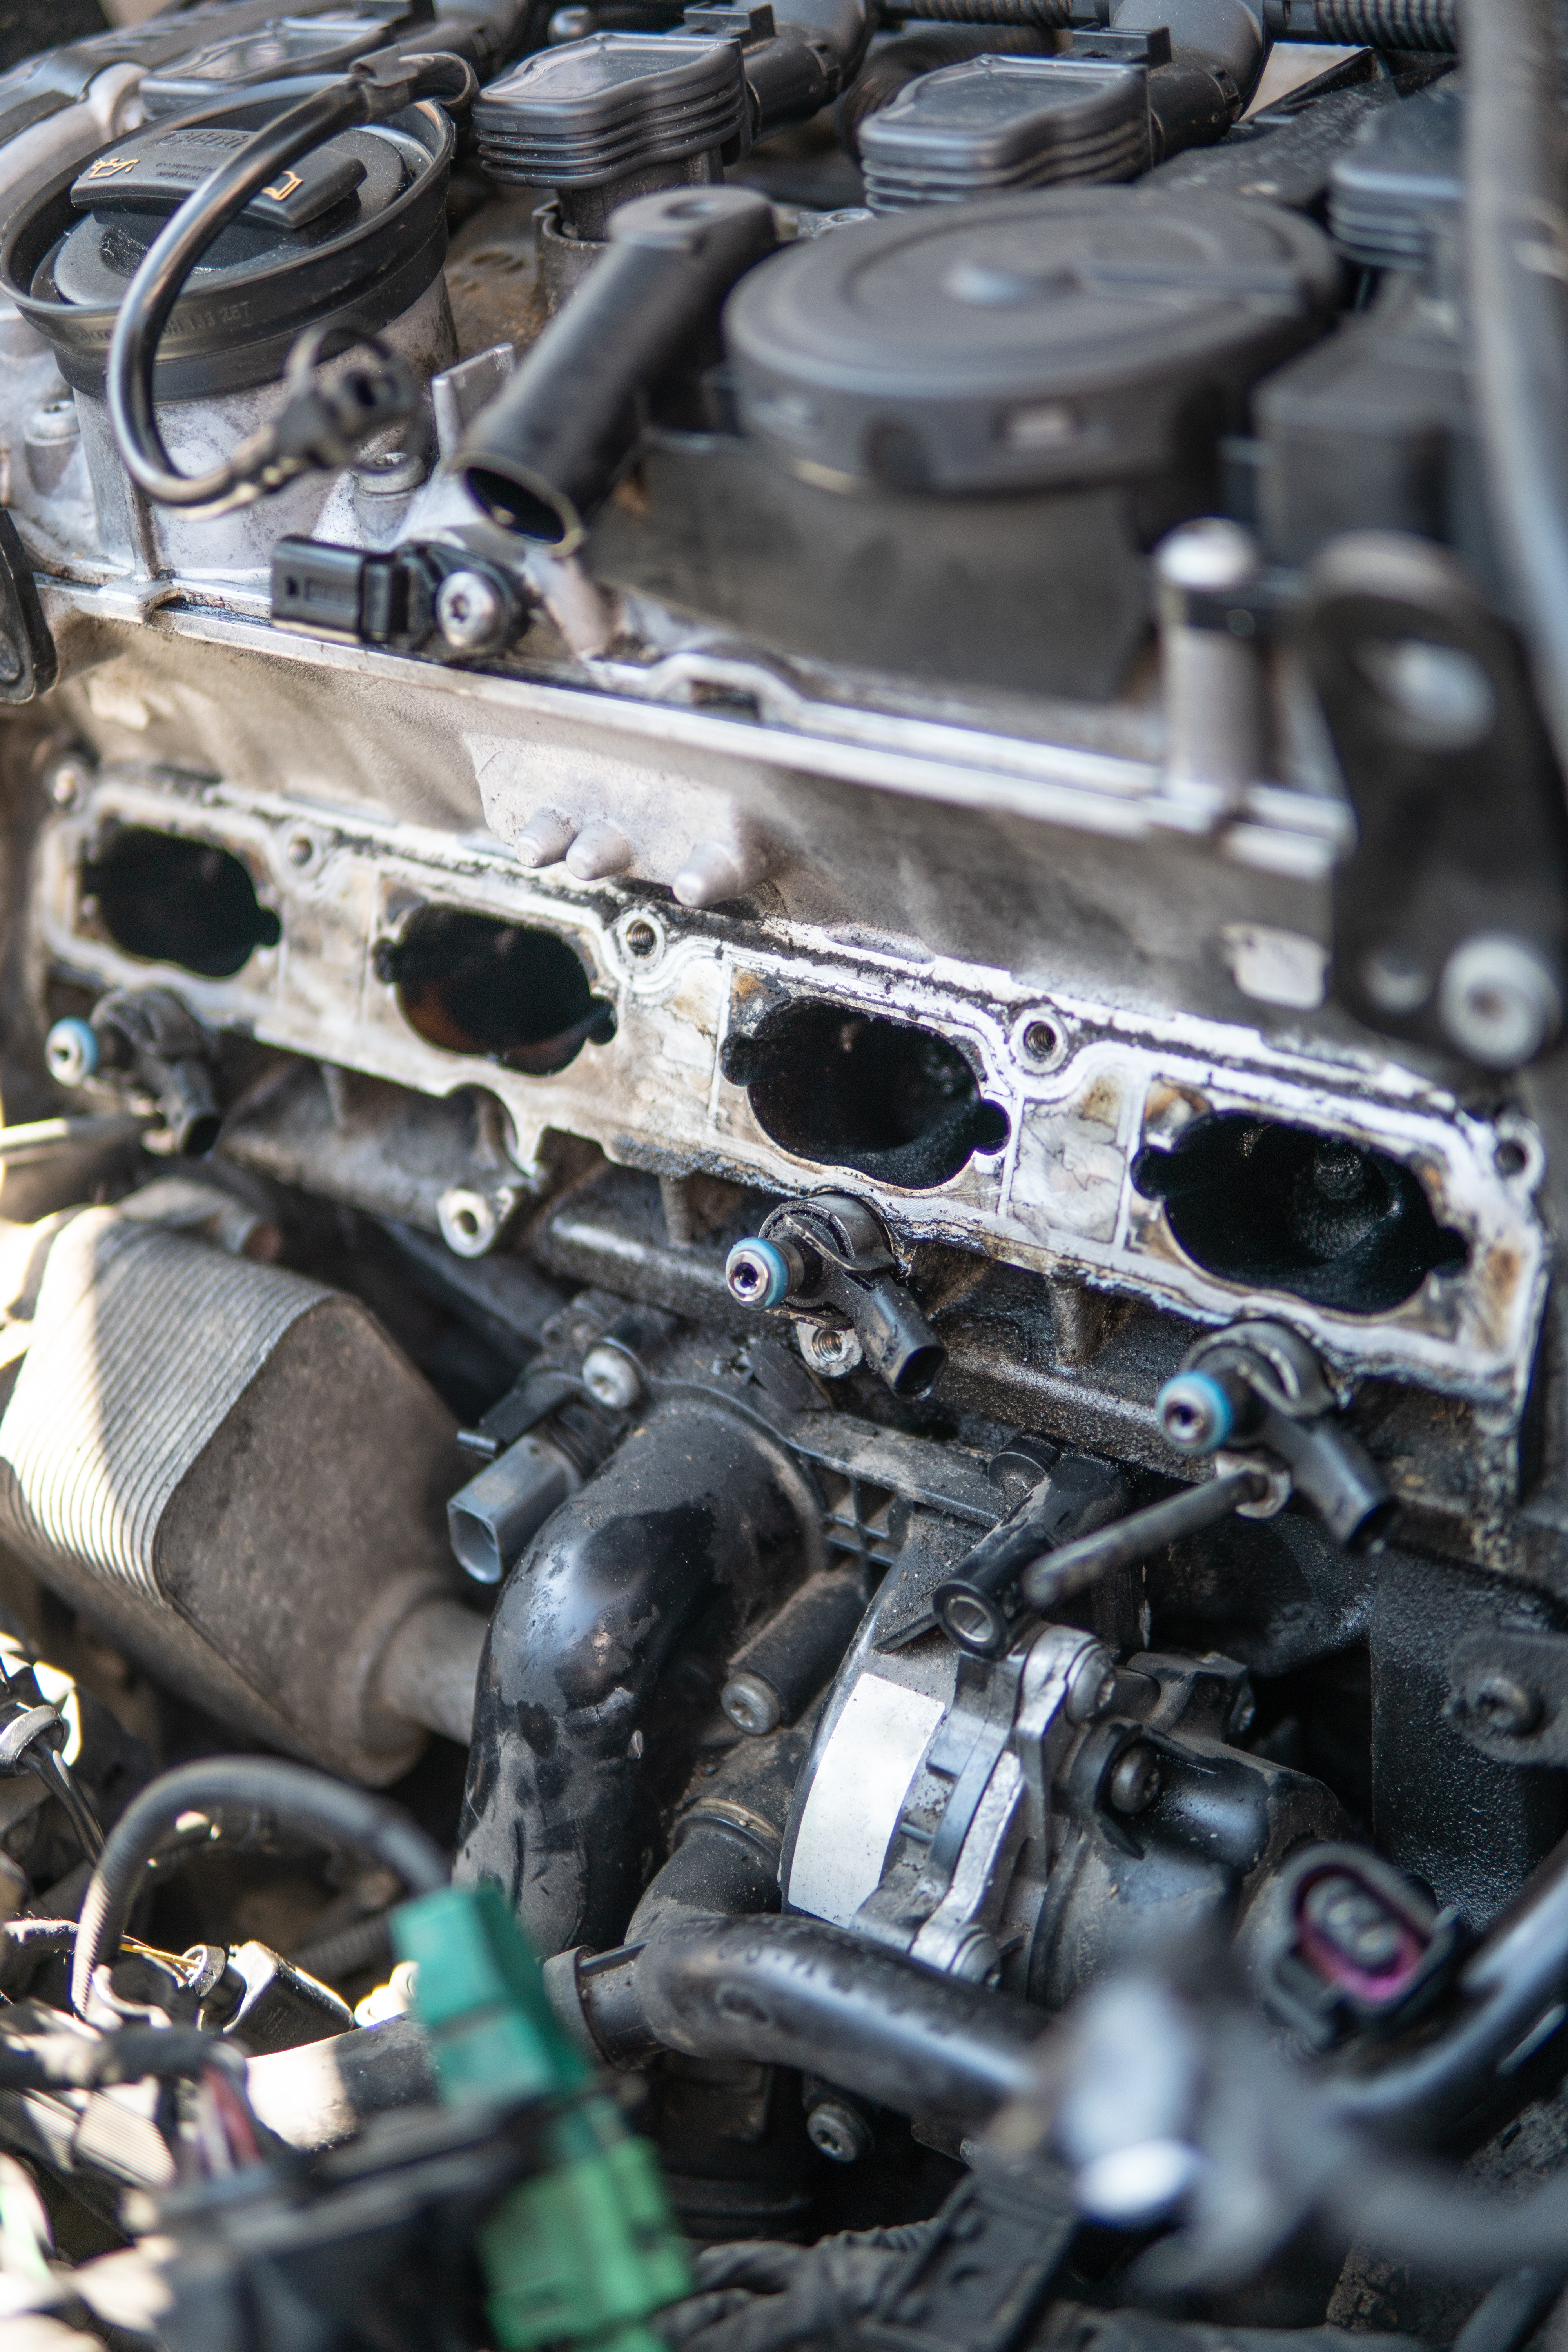 An image of a dirty intake manifold but DPF Alternatives can help with our expert intake manifold cleaning service in New Mexico / Farmington, NM.